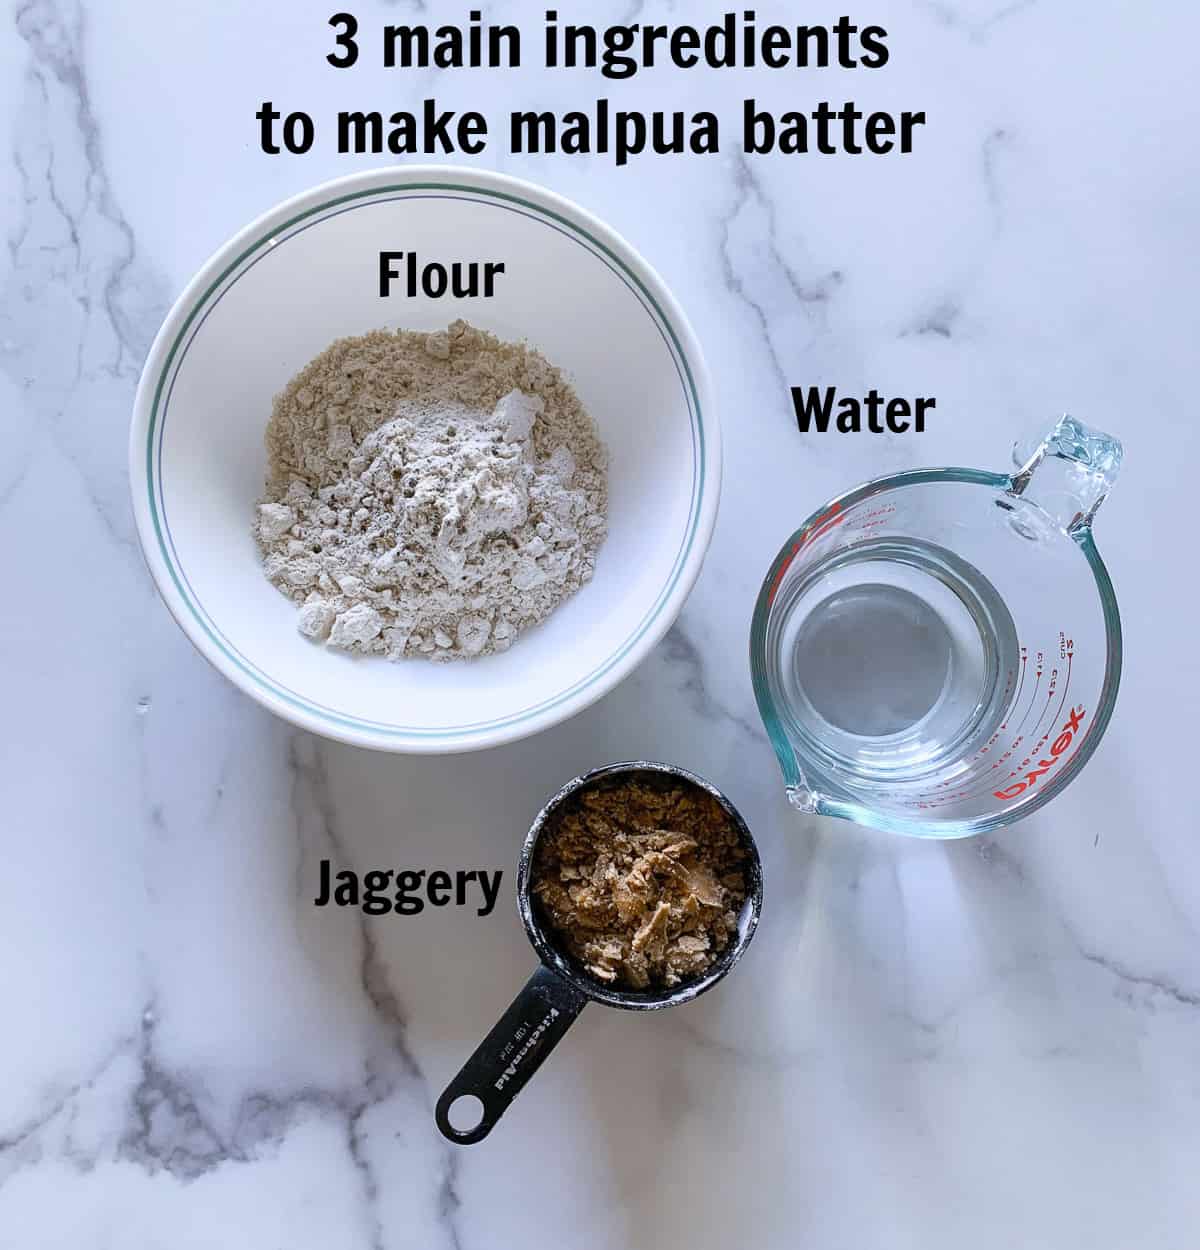 Ingredients used to make malpuas are shown